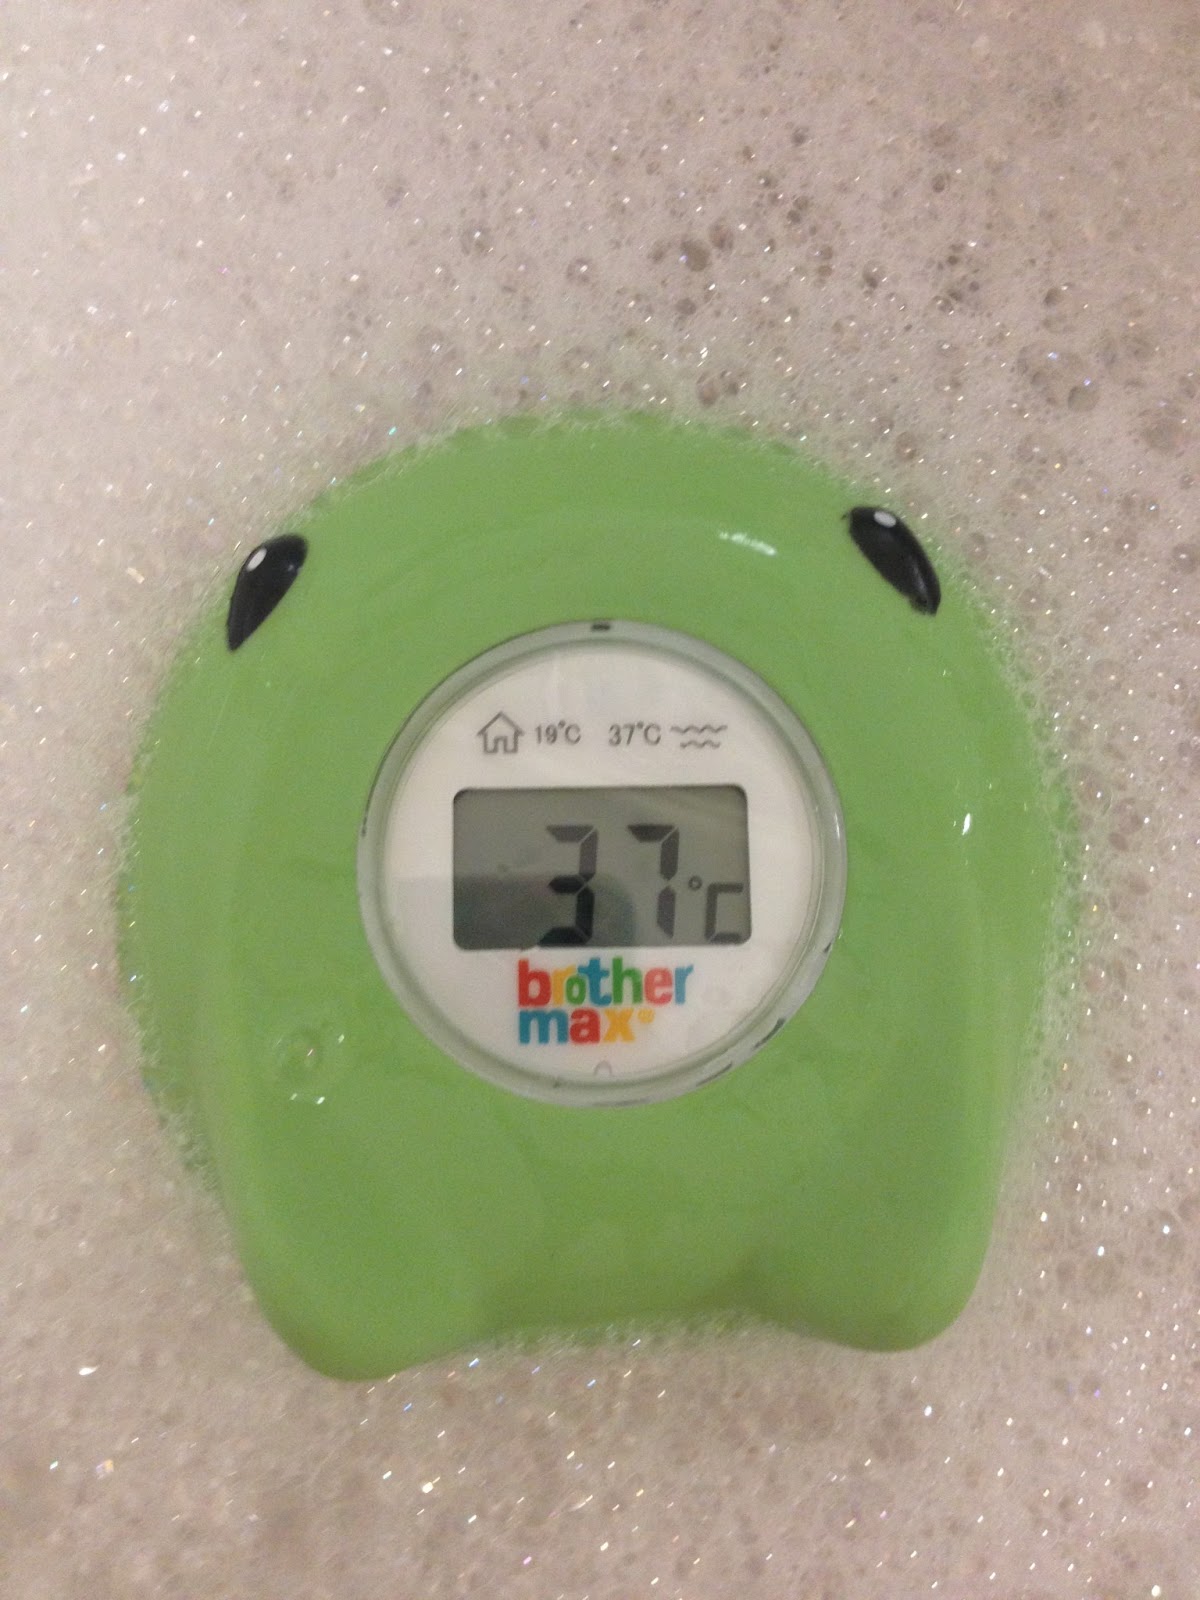 brother max 2 in 1 thermometer review